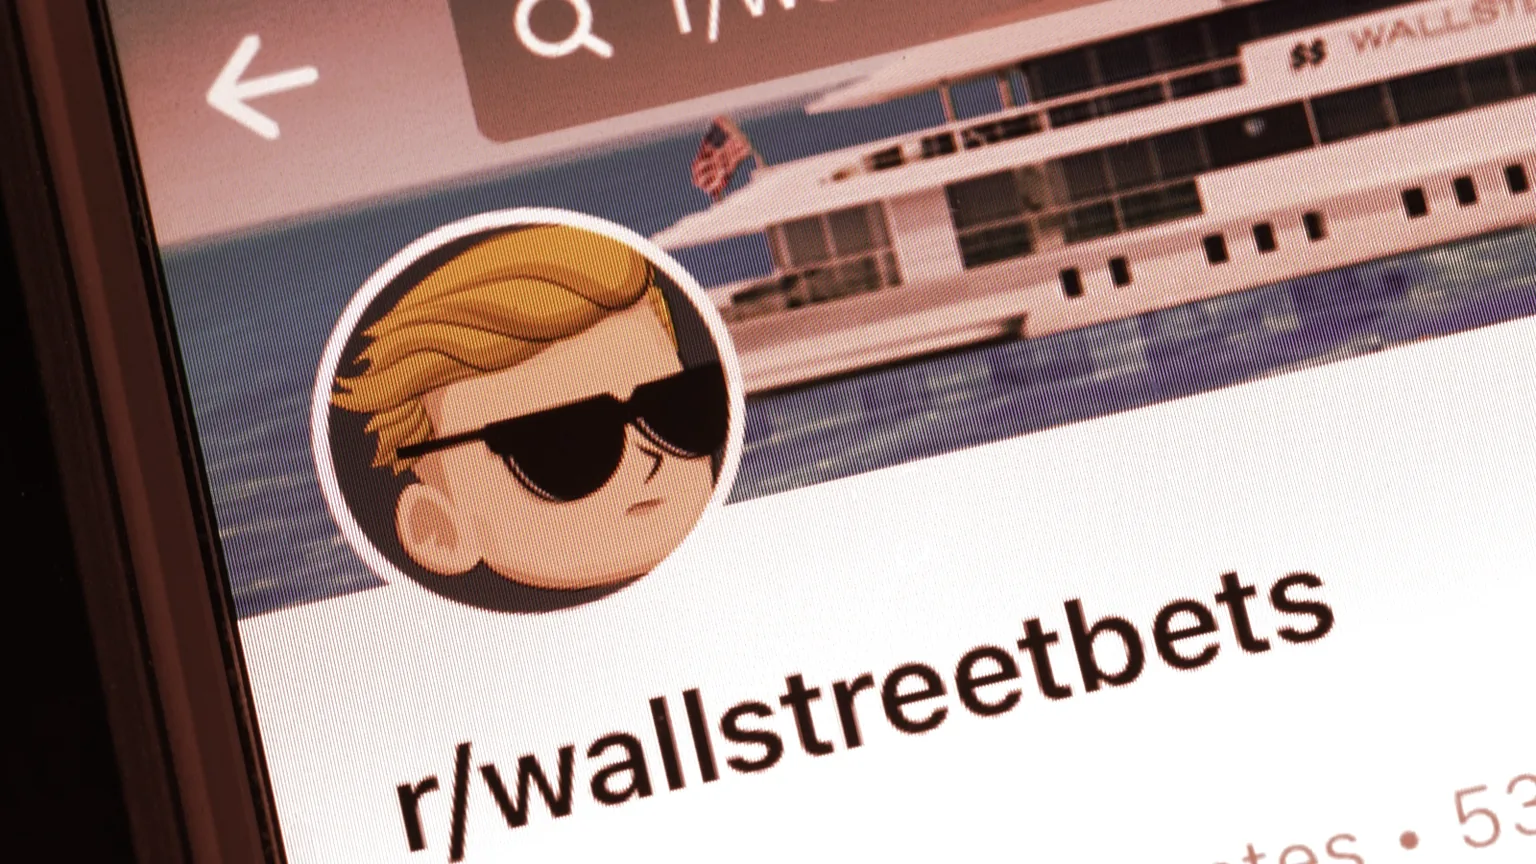 WallStreetBets was a controversial subreddit that rose to fame in early 2021. Image: Shutterstock